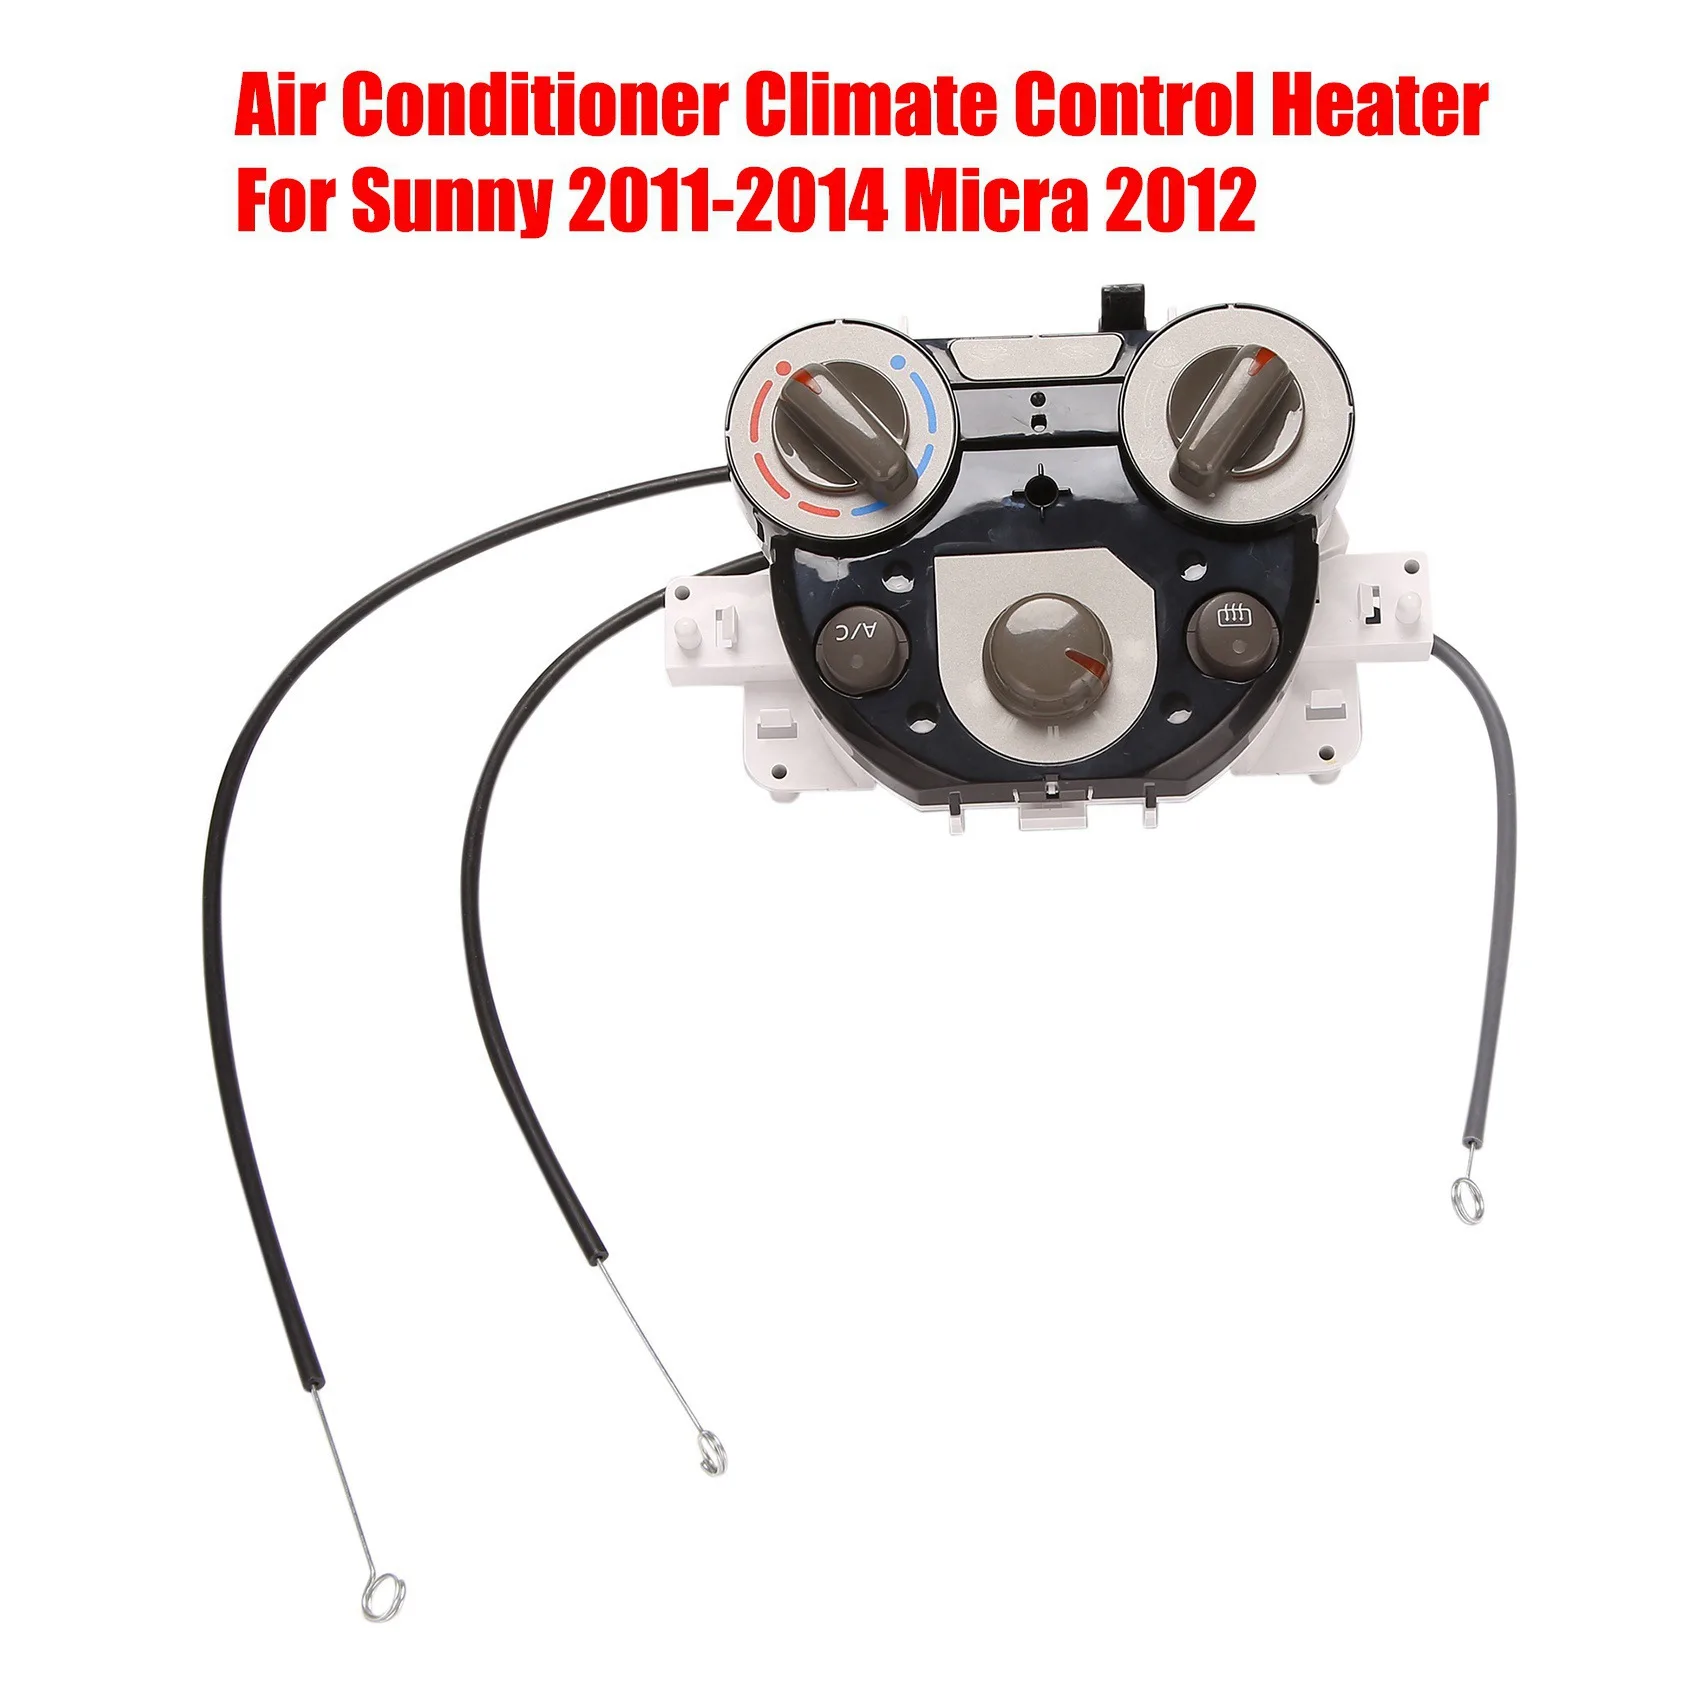 

Car Interior Air Conditioner Climate Control AC Warm Air Heater Switch Panel for Nissan Sunny 2011-2014 Micra 2012